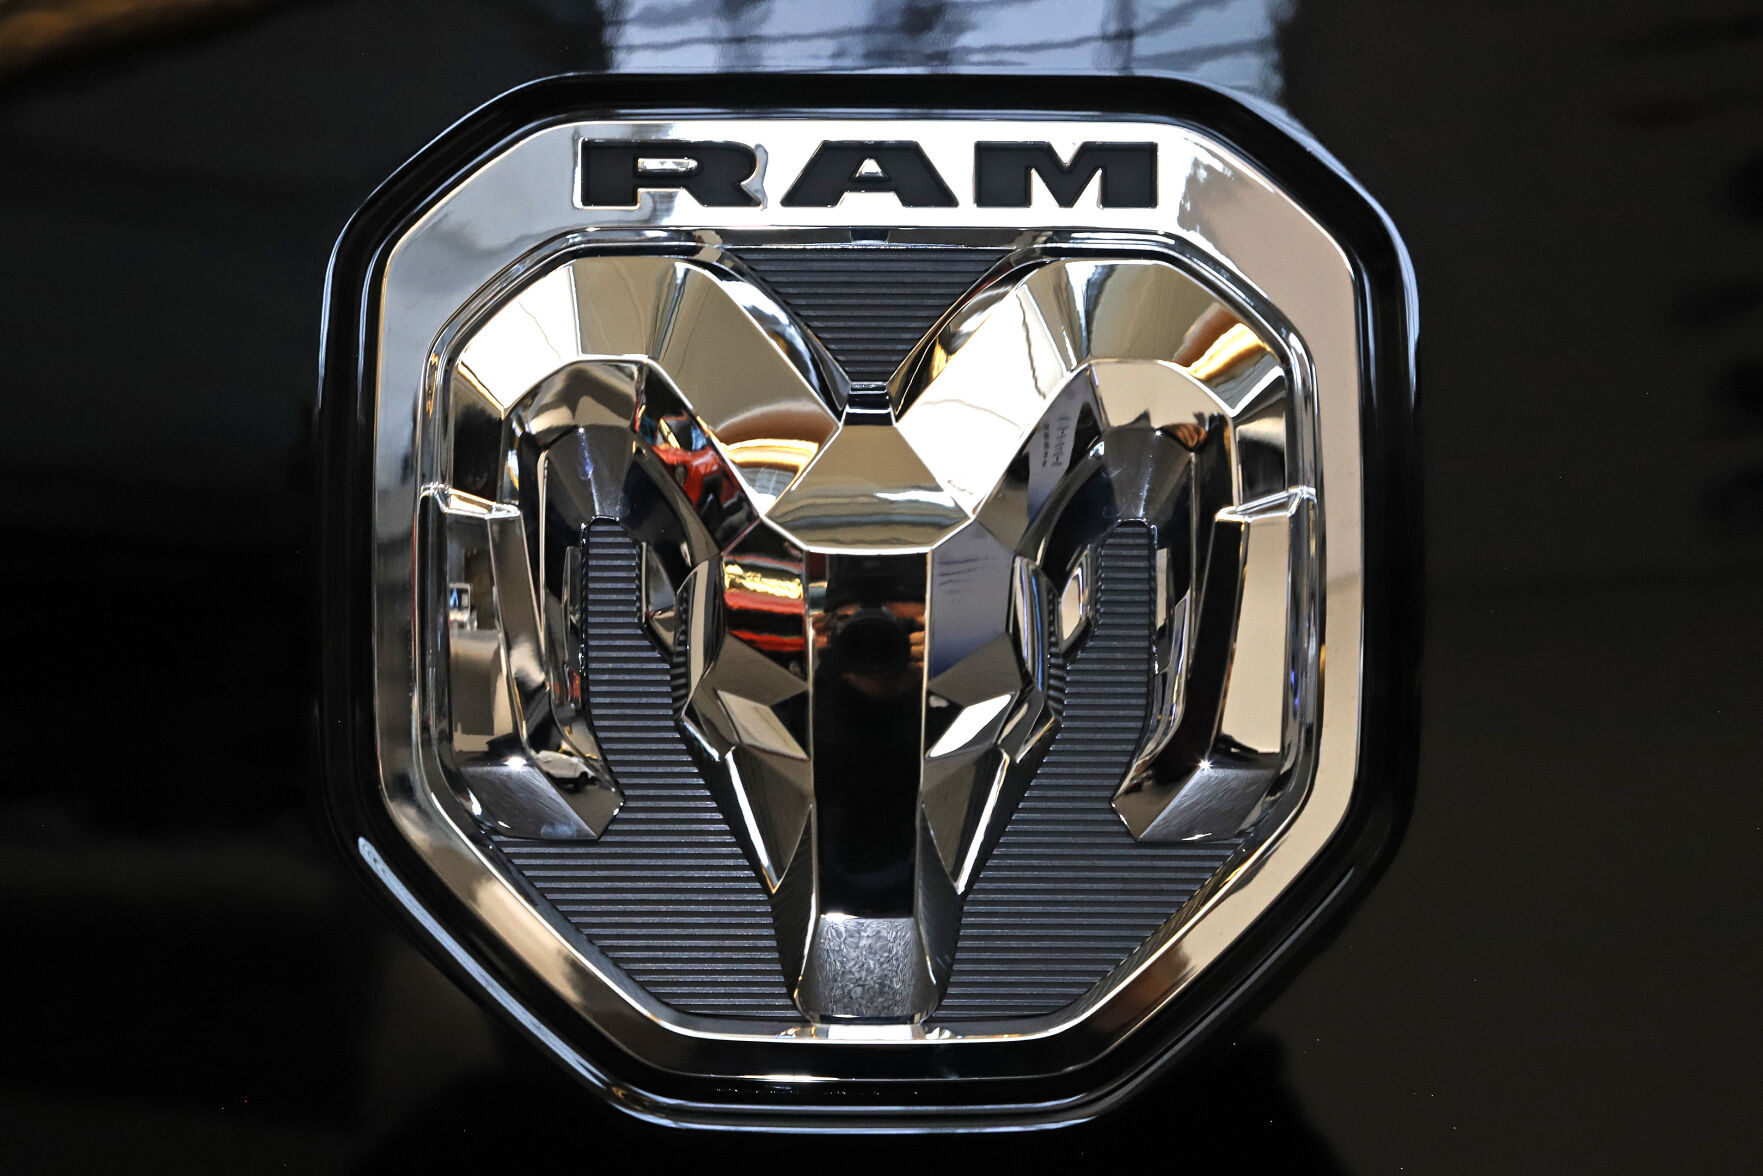 <p>FILE - This Feb. 13, 2020 photo shows the Ram truck logo at the 2020 Pittsburgh International Auto Show in Pittsburgh. U.S. auto safety regulators will not seek a recall after a seven-year investigation into complaints that more than 1 million Dodge and Ram vehicles can roll away after being shifted into park. (AP Photo/Gene J. Puskar, file)</p>   PHOTO CREDIT: Gene J. Puskar 